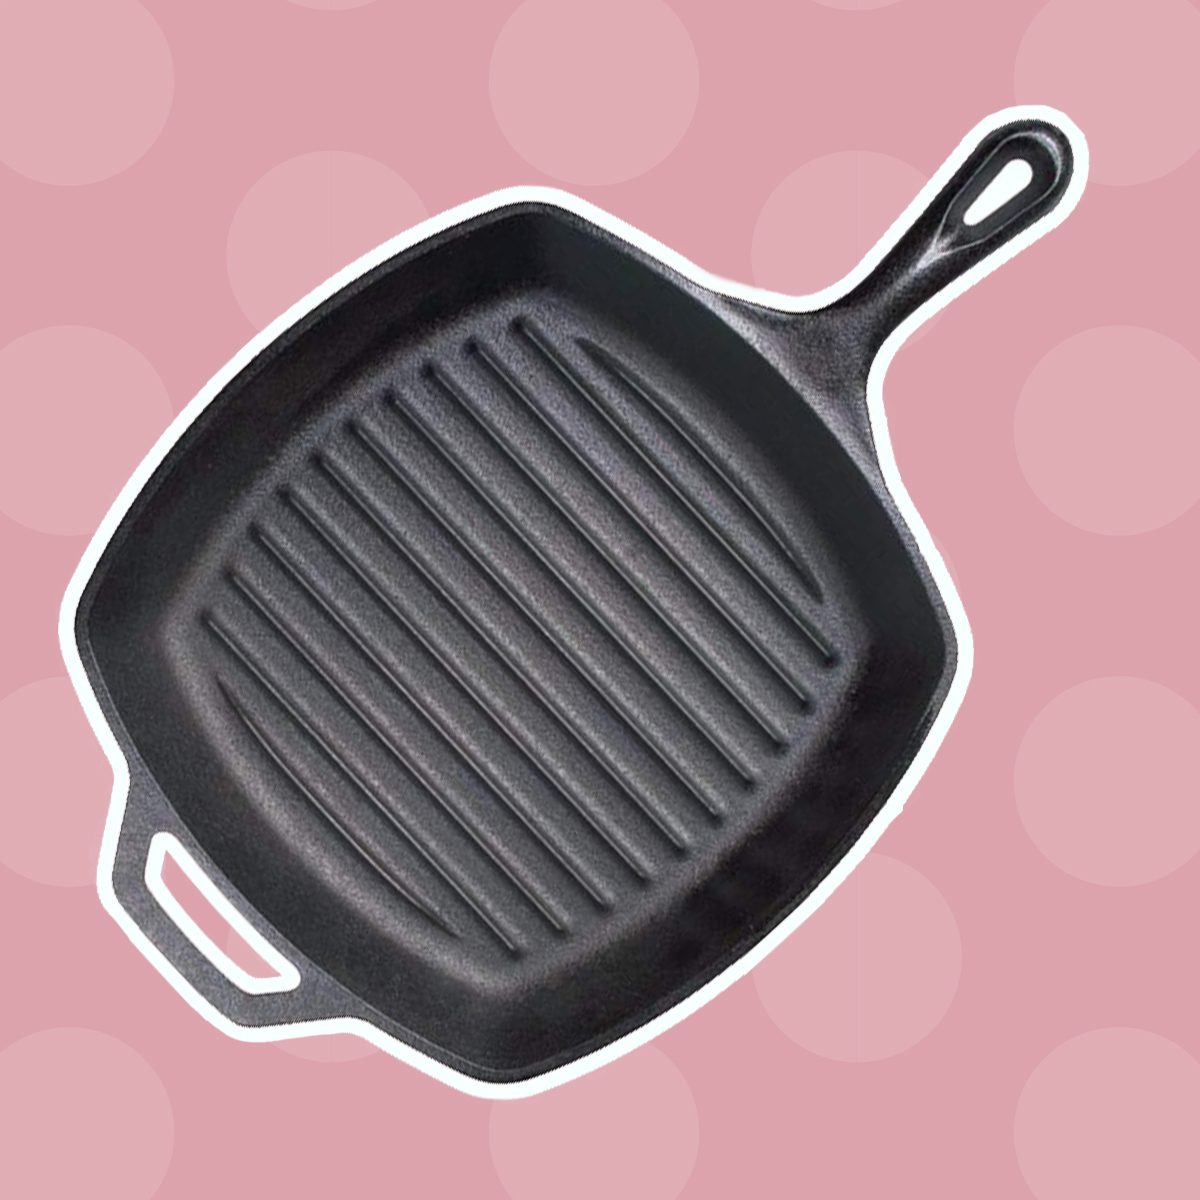 https://www.tasteofhome.com/wp-content/uploads/2019/02/Inch-Square-Cast-Iron-Grill-Pan.jpg?fit=700%2C700